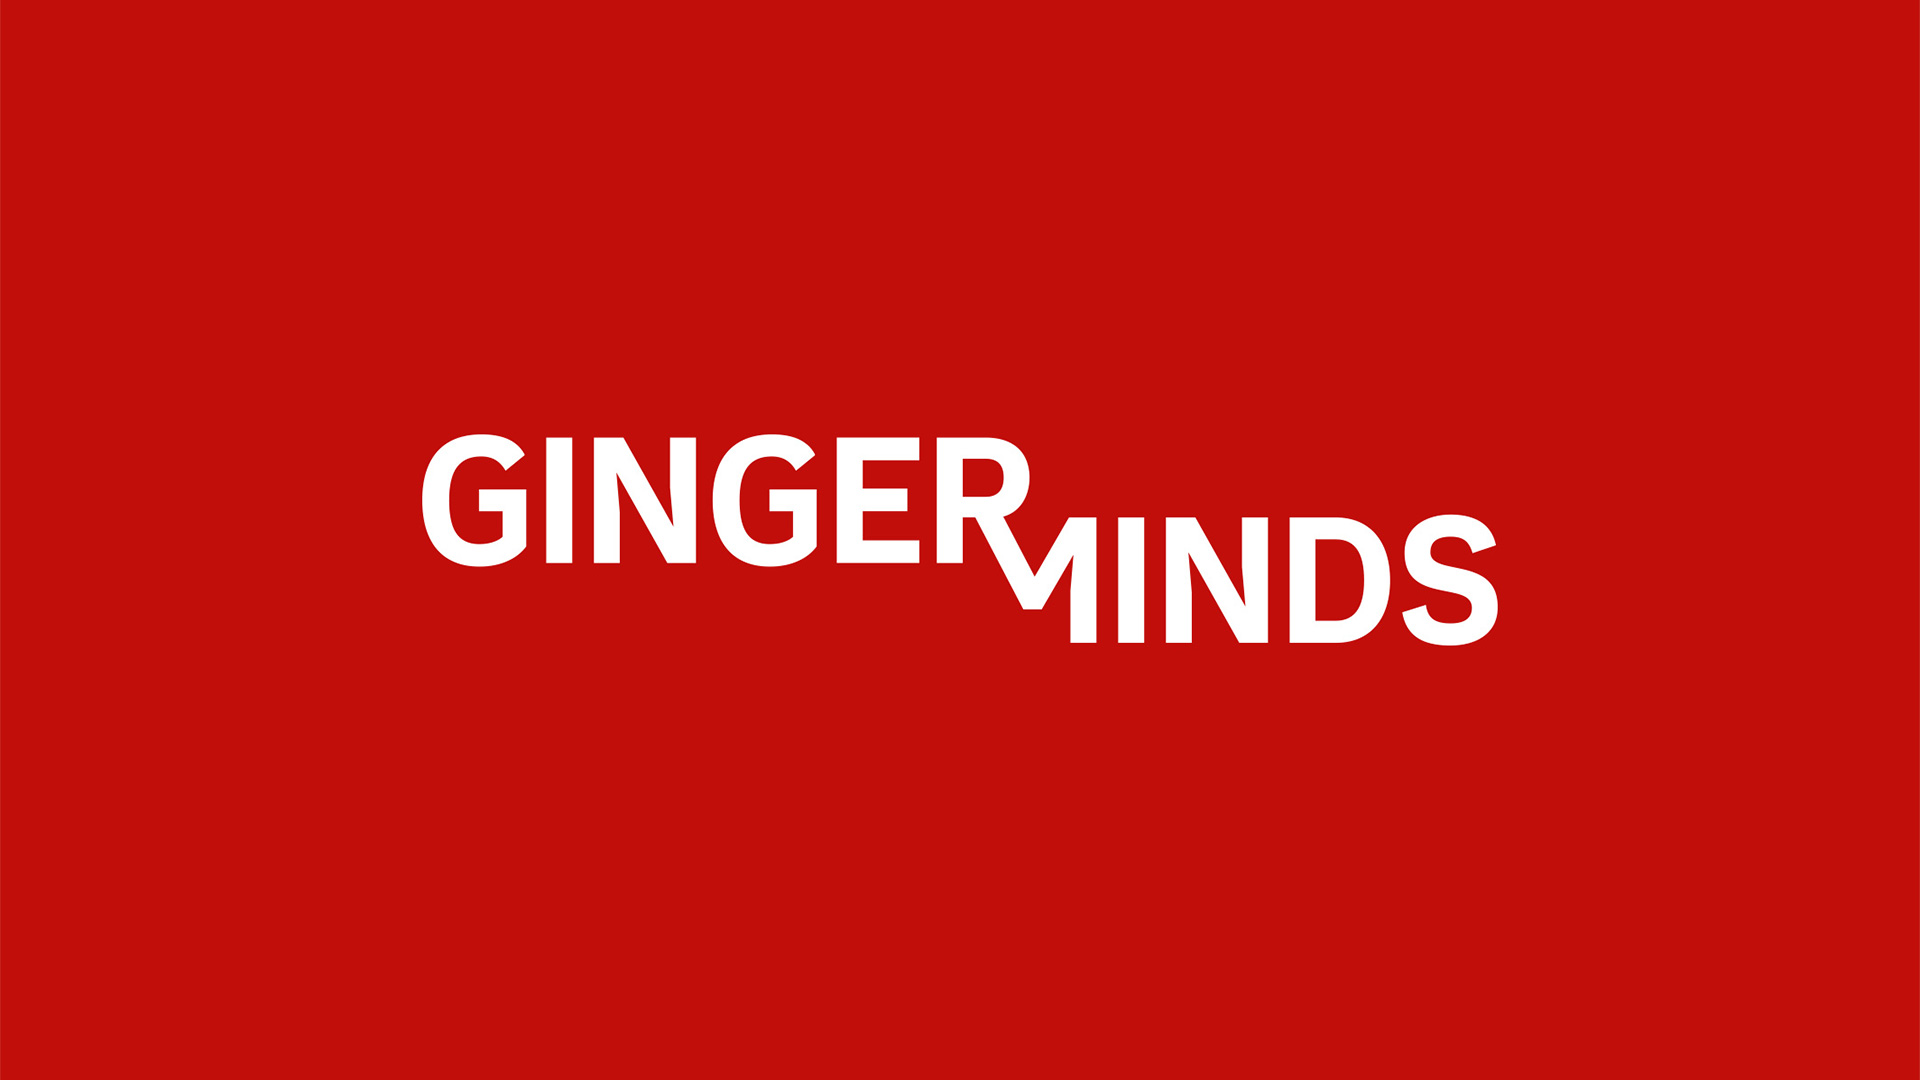 Gingerminds